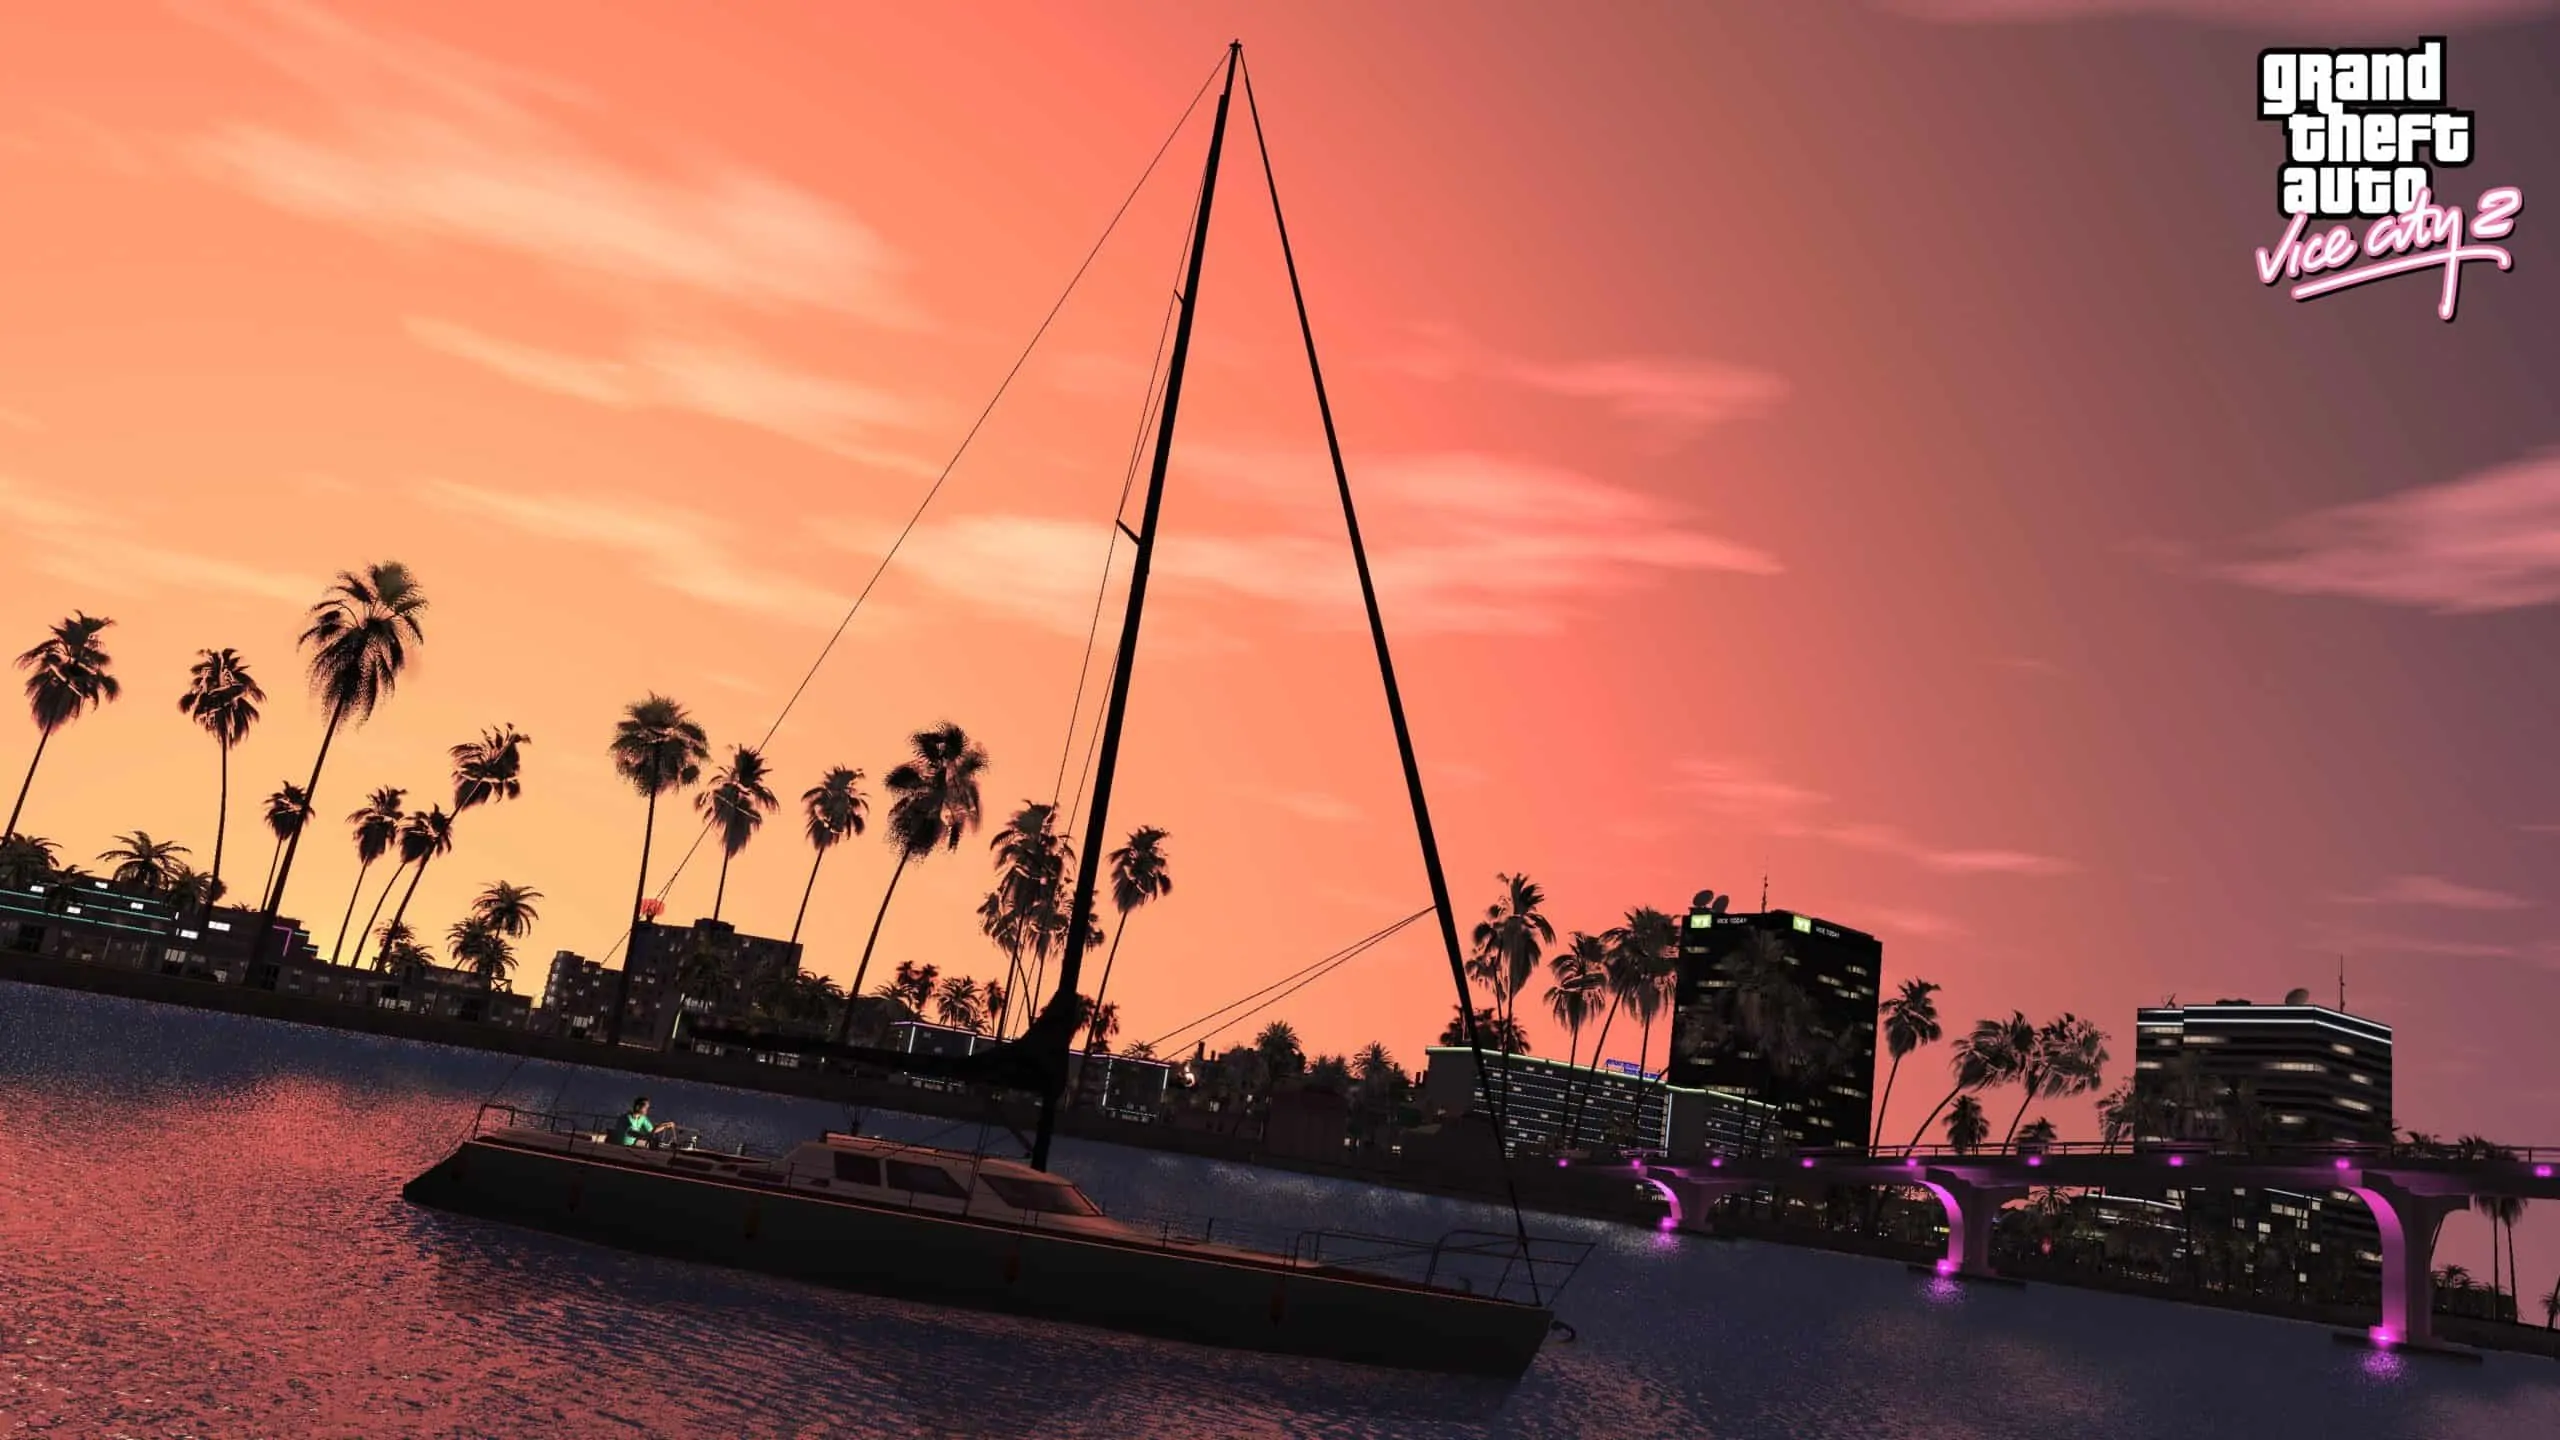 Fan Made GTA: Vice City Remaster In RAGE Engine Shown Off In New Screenshots